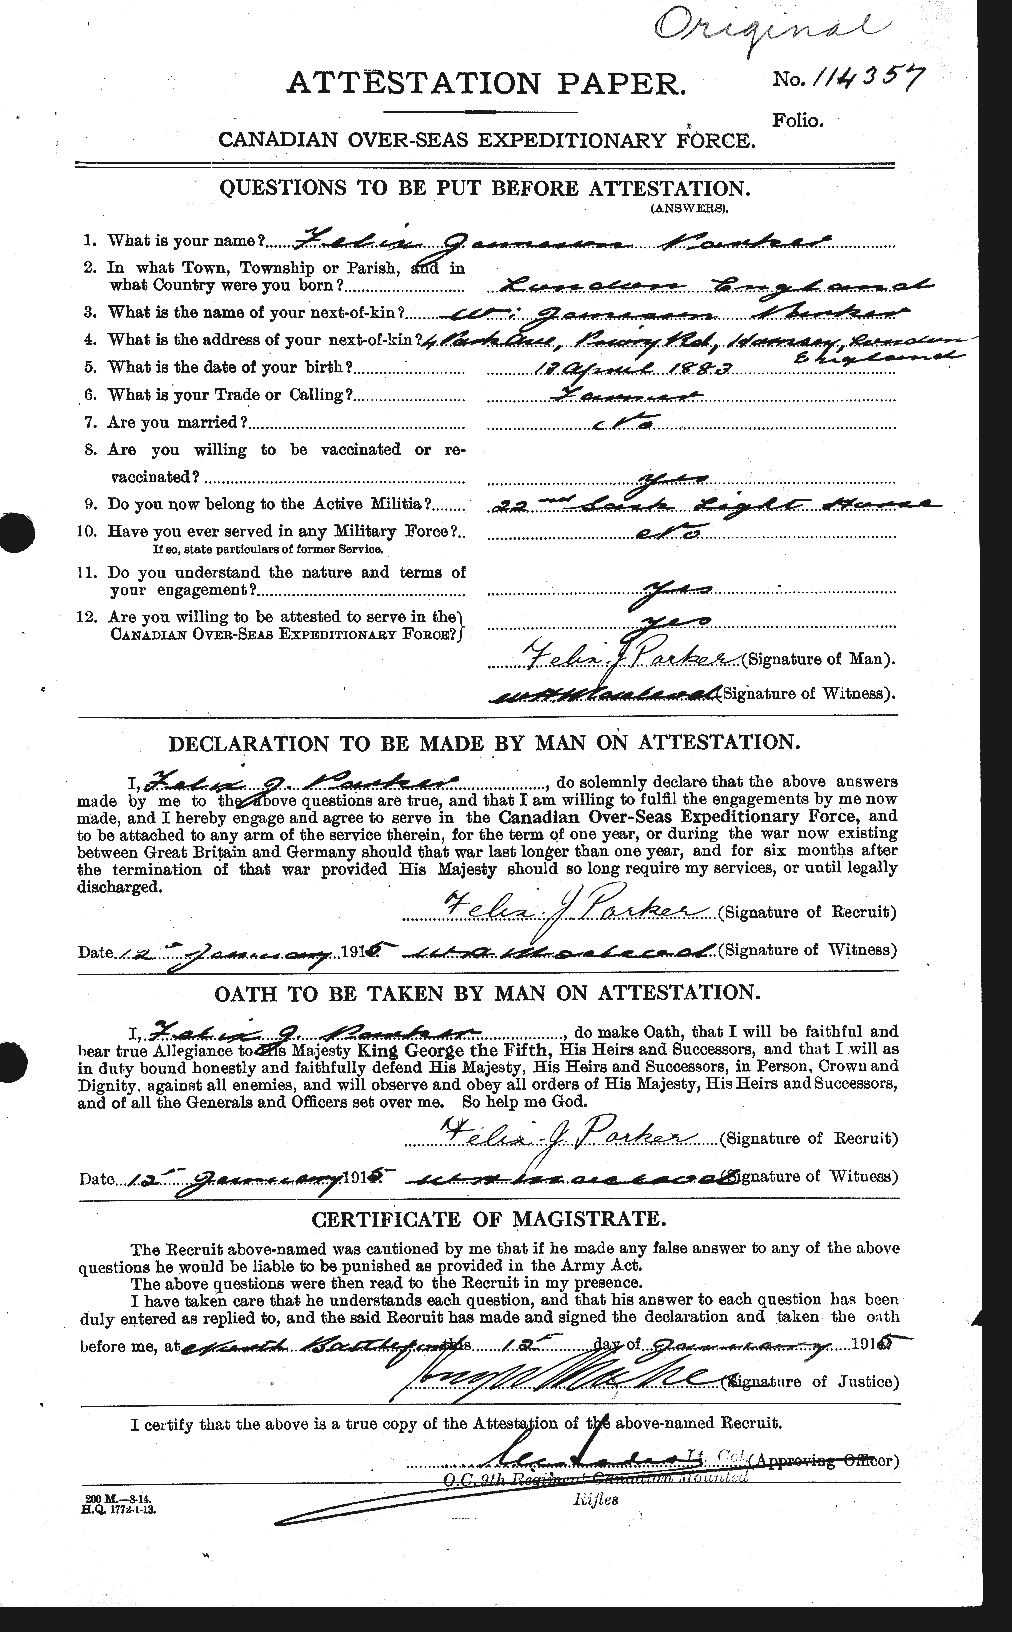 Personnel Records of the First World War - CEF 565173a